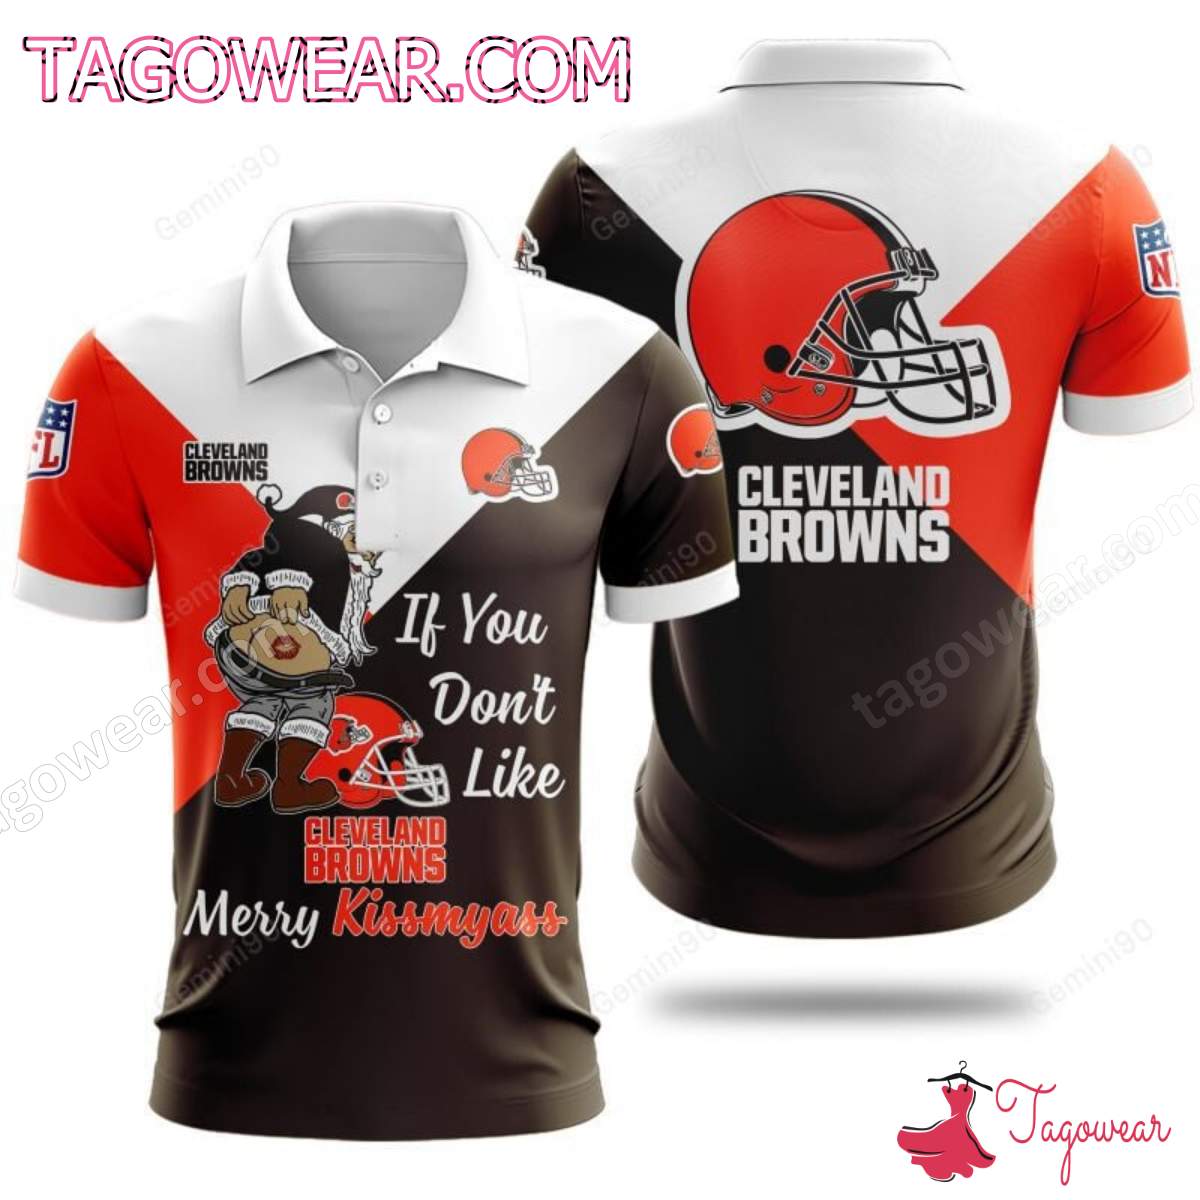 If You Don't Like Cleveland Browns Merry Kissmyass T-shirt, Polo, Hoodie